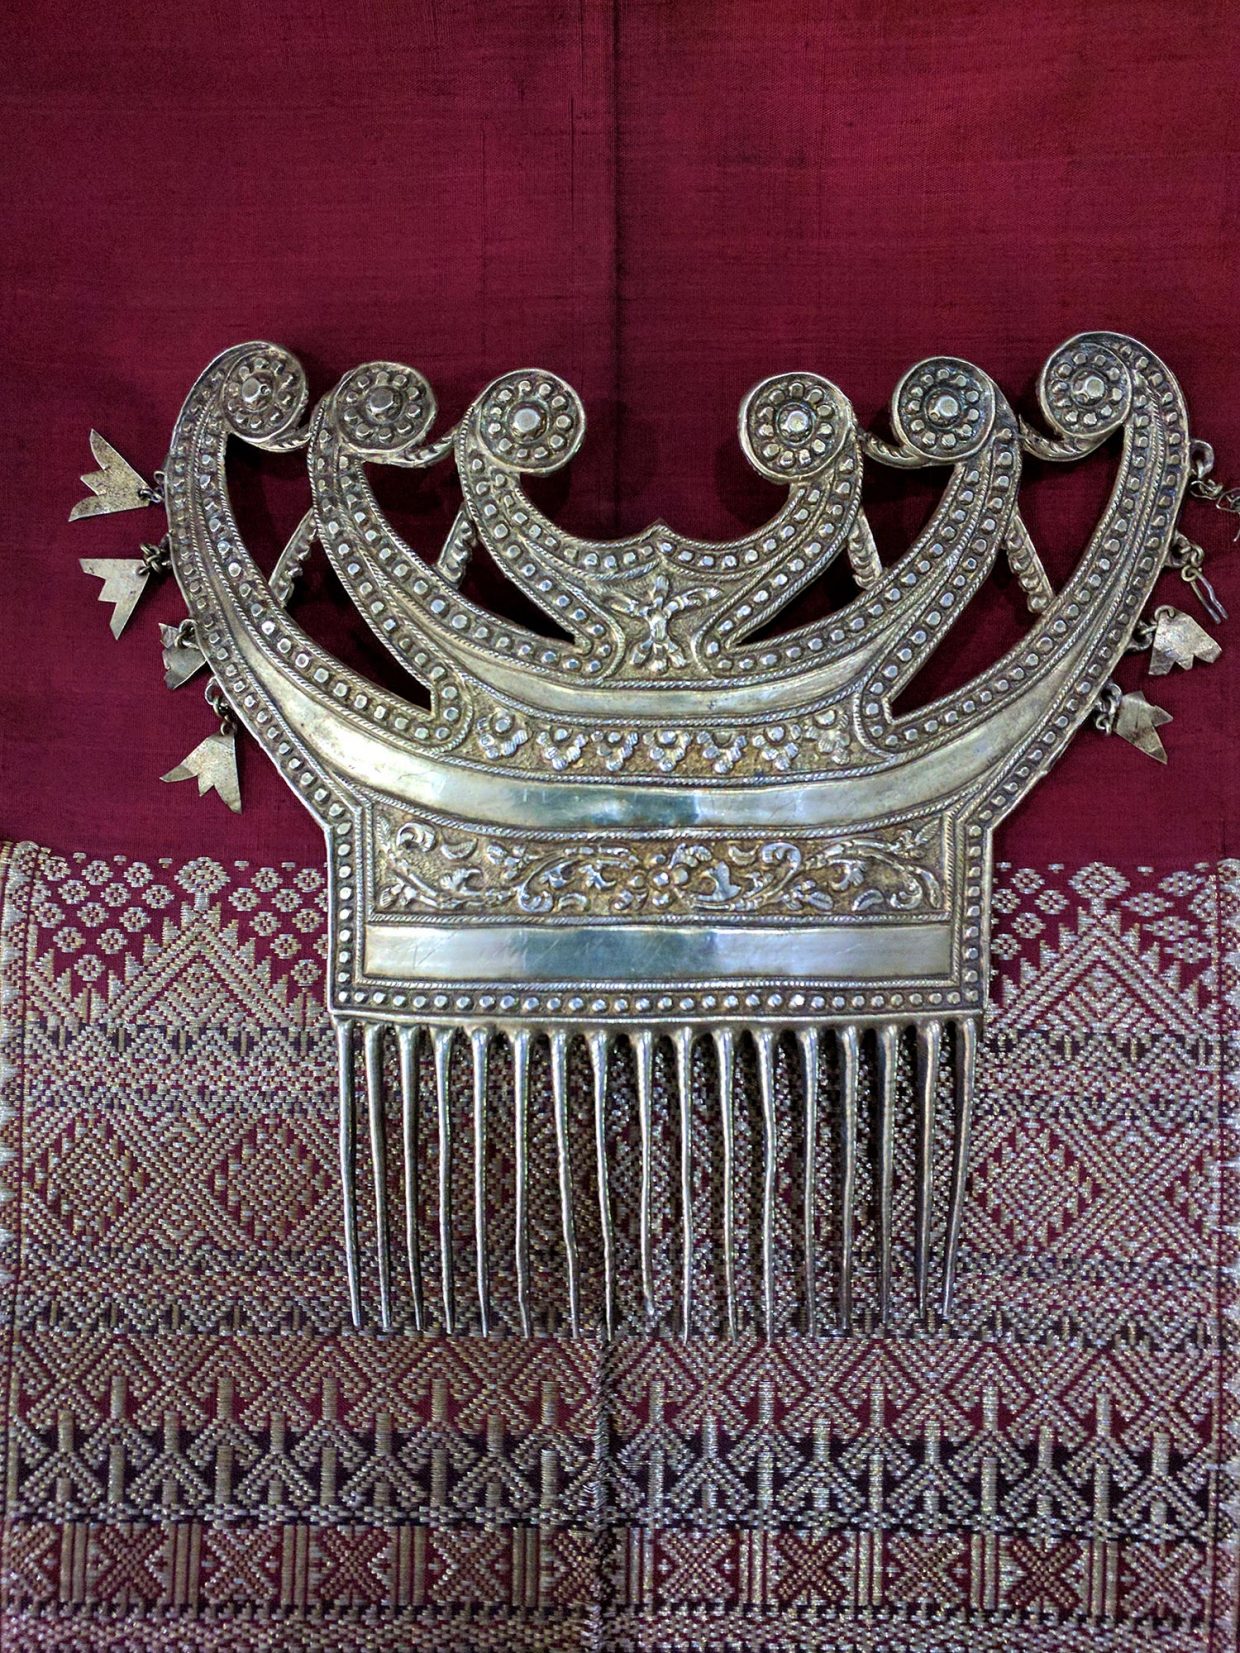 Antique Silver Comb from Lampung Sumatra